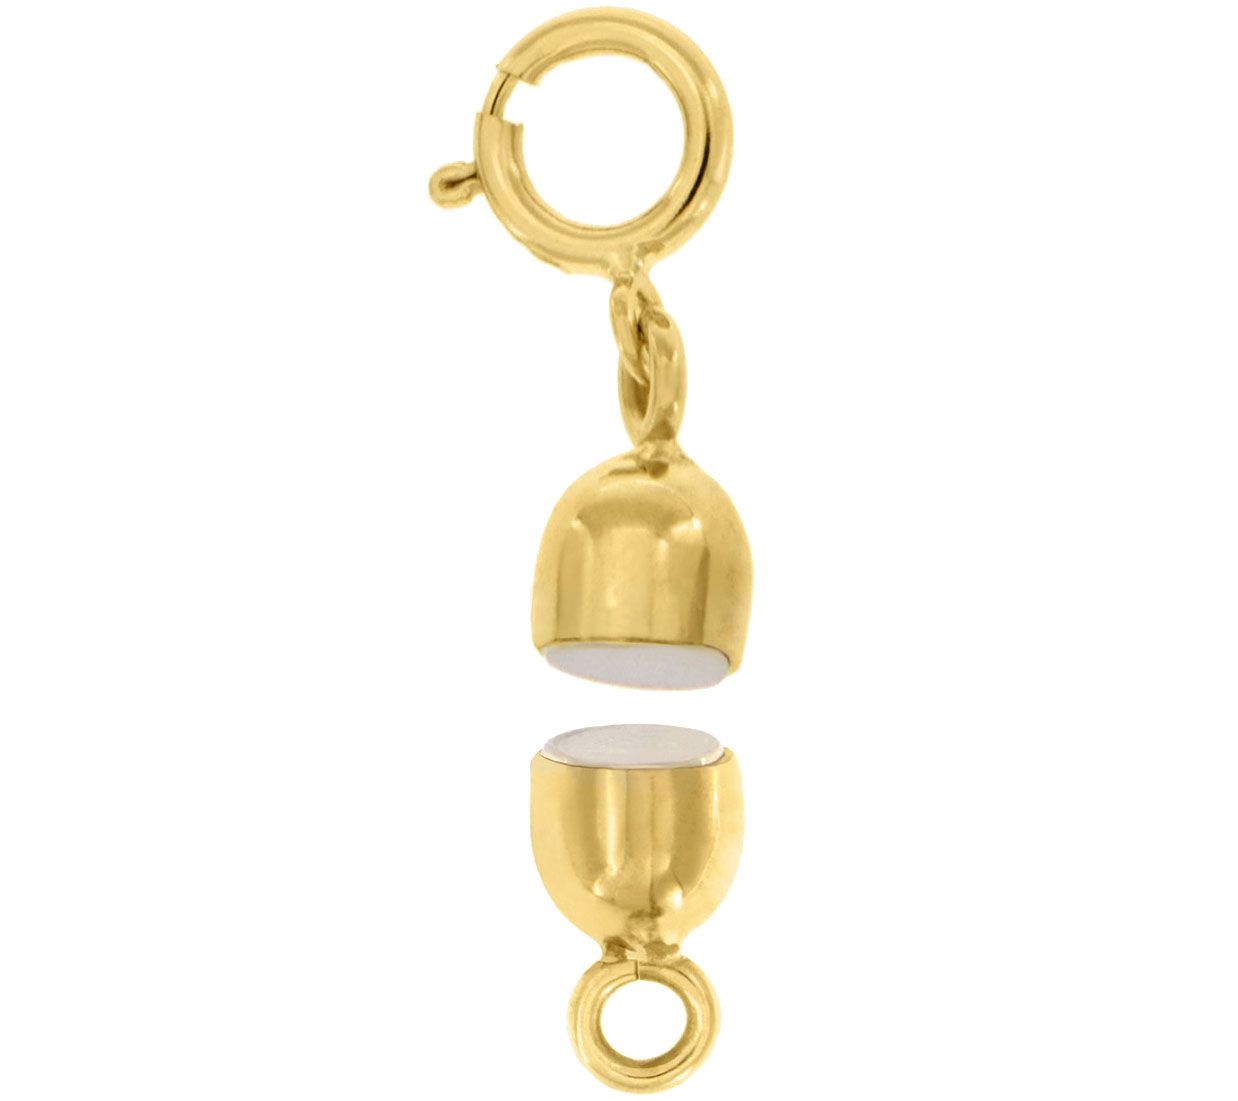 DEELLEEO 12 Pcs Locking Magnetic Jewelry Clasps for Women,Gold